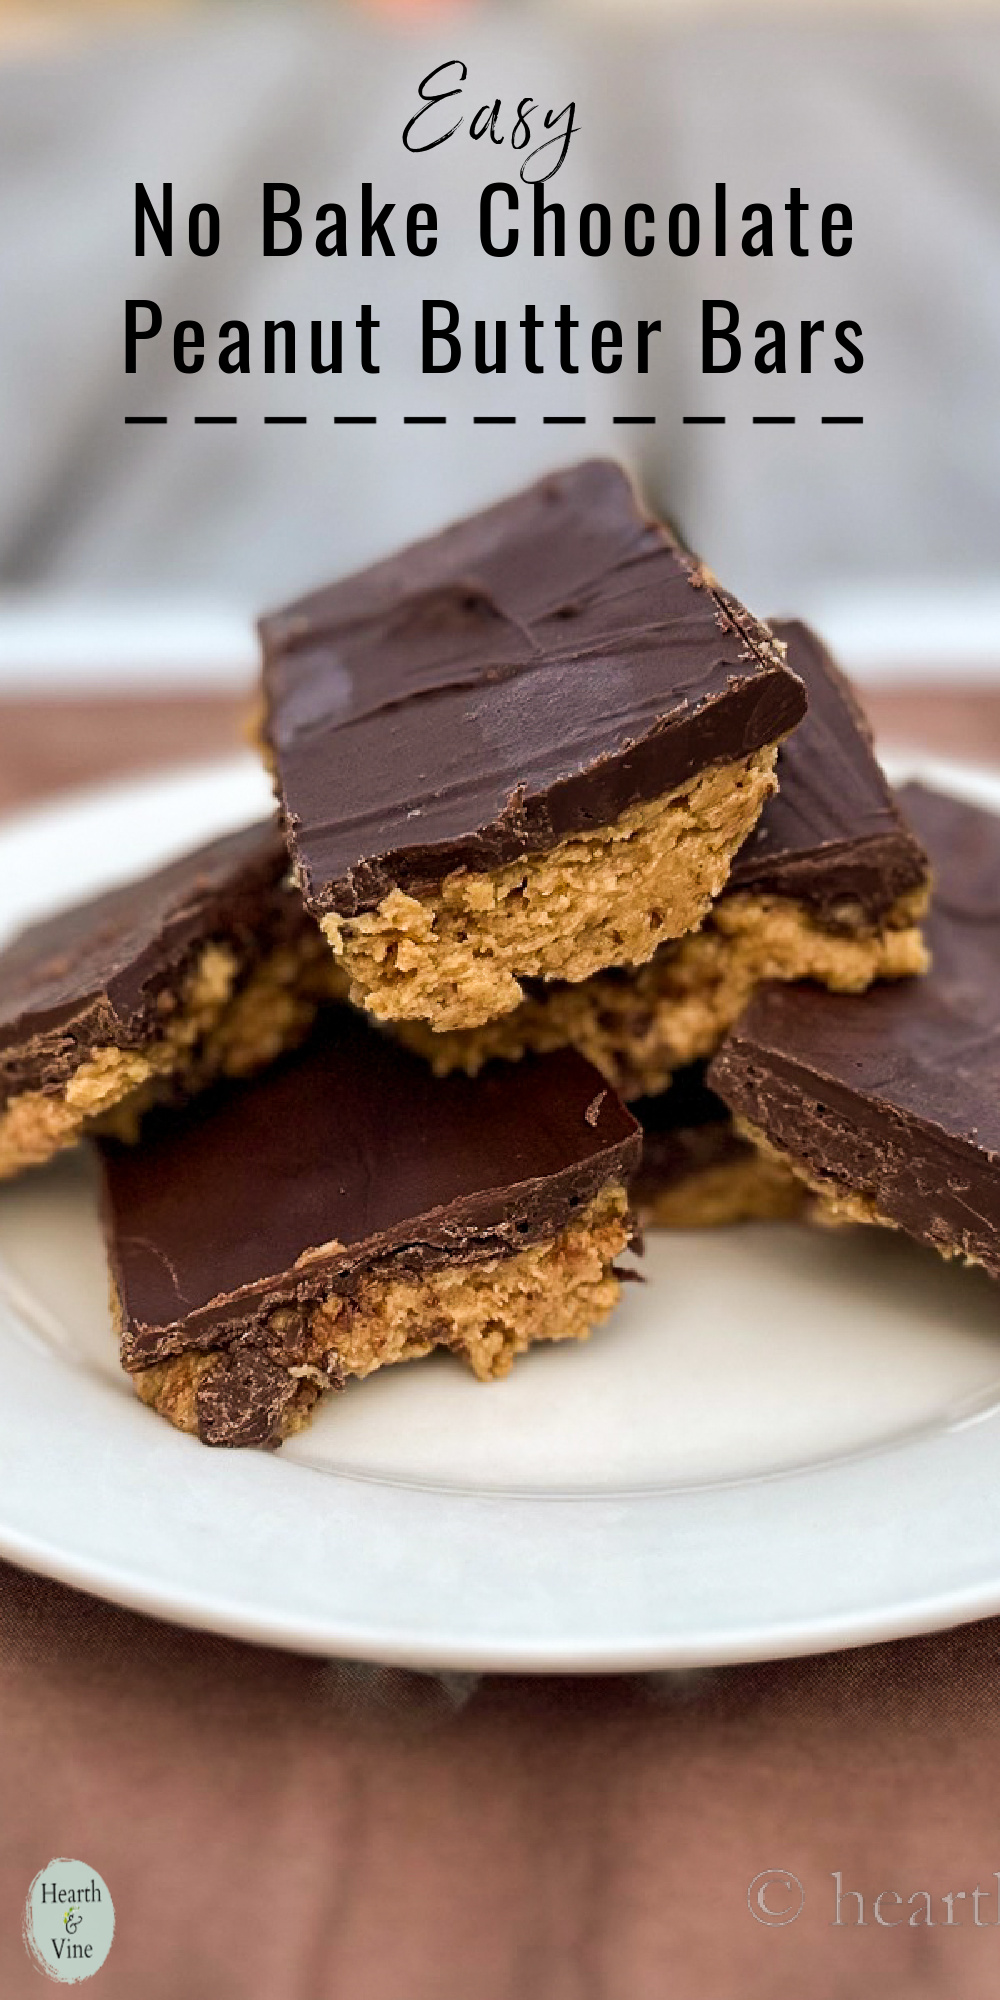 A plate of stacked chocolate peanut butter bars.